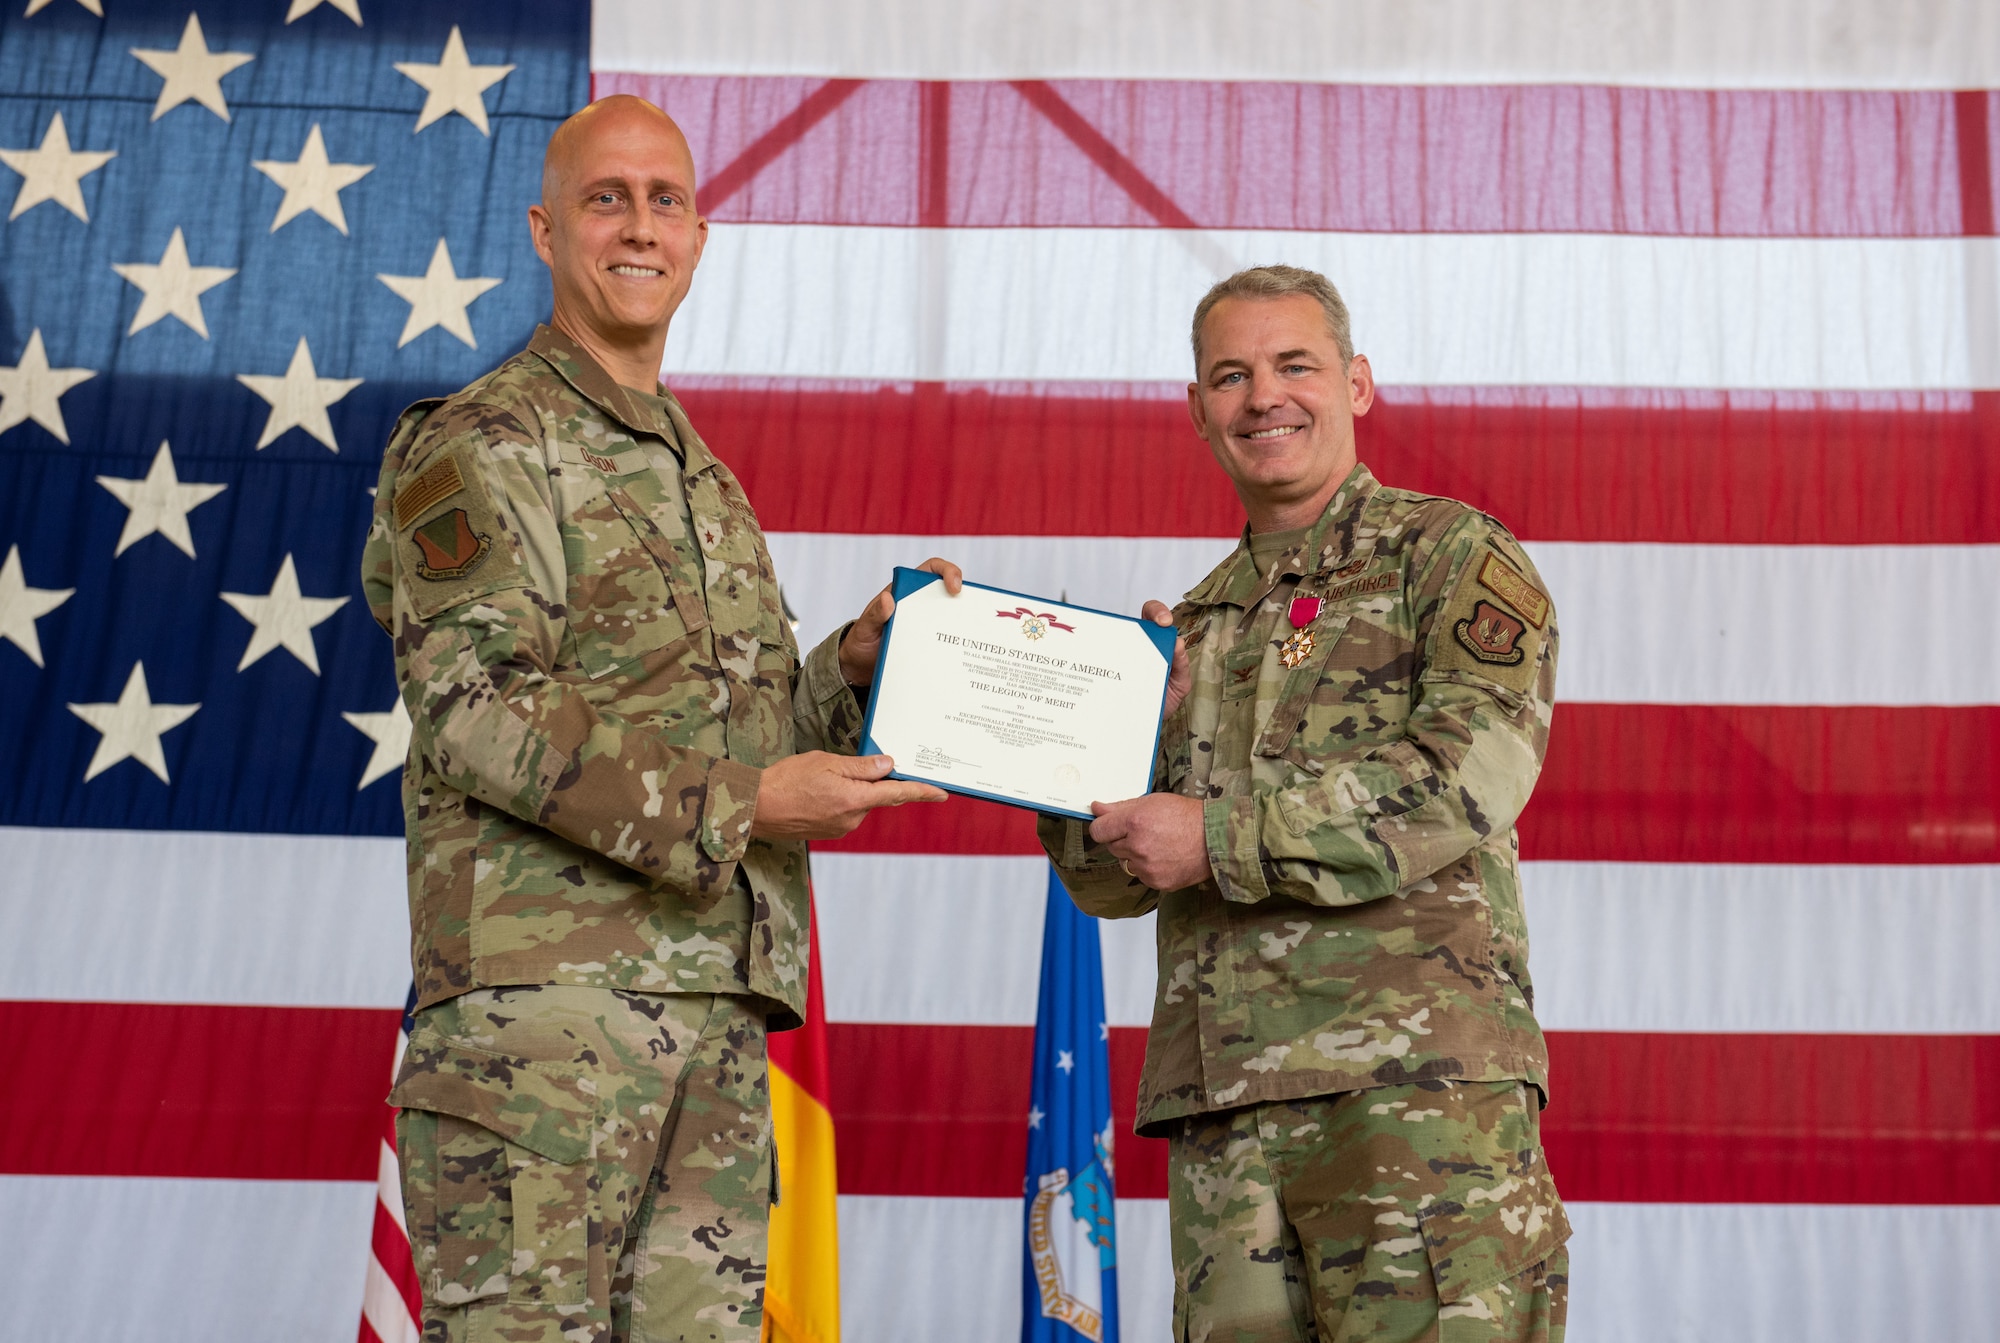 U.S. Air Force Brig. Gen. Joshua M. Olson, 86th Airlift Wing commander, left, presents Col. Christopher B. Meeker, 86th Civil Engineer Group outgoing commander, with a Legion of Merit certificate during the 86 CEG change of command ceremony at Ramstein Air Base, Germany